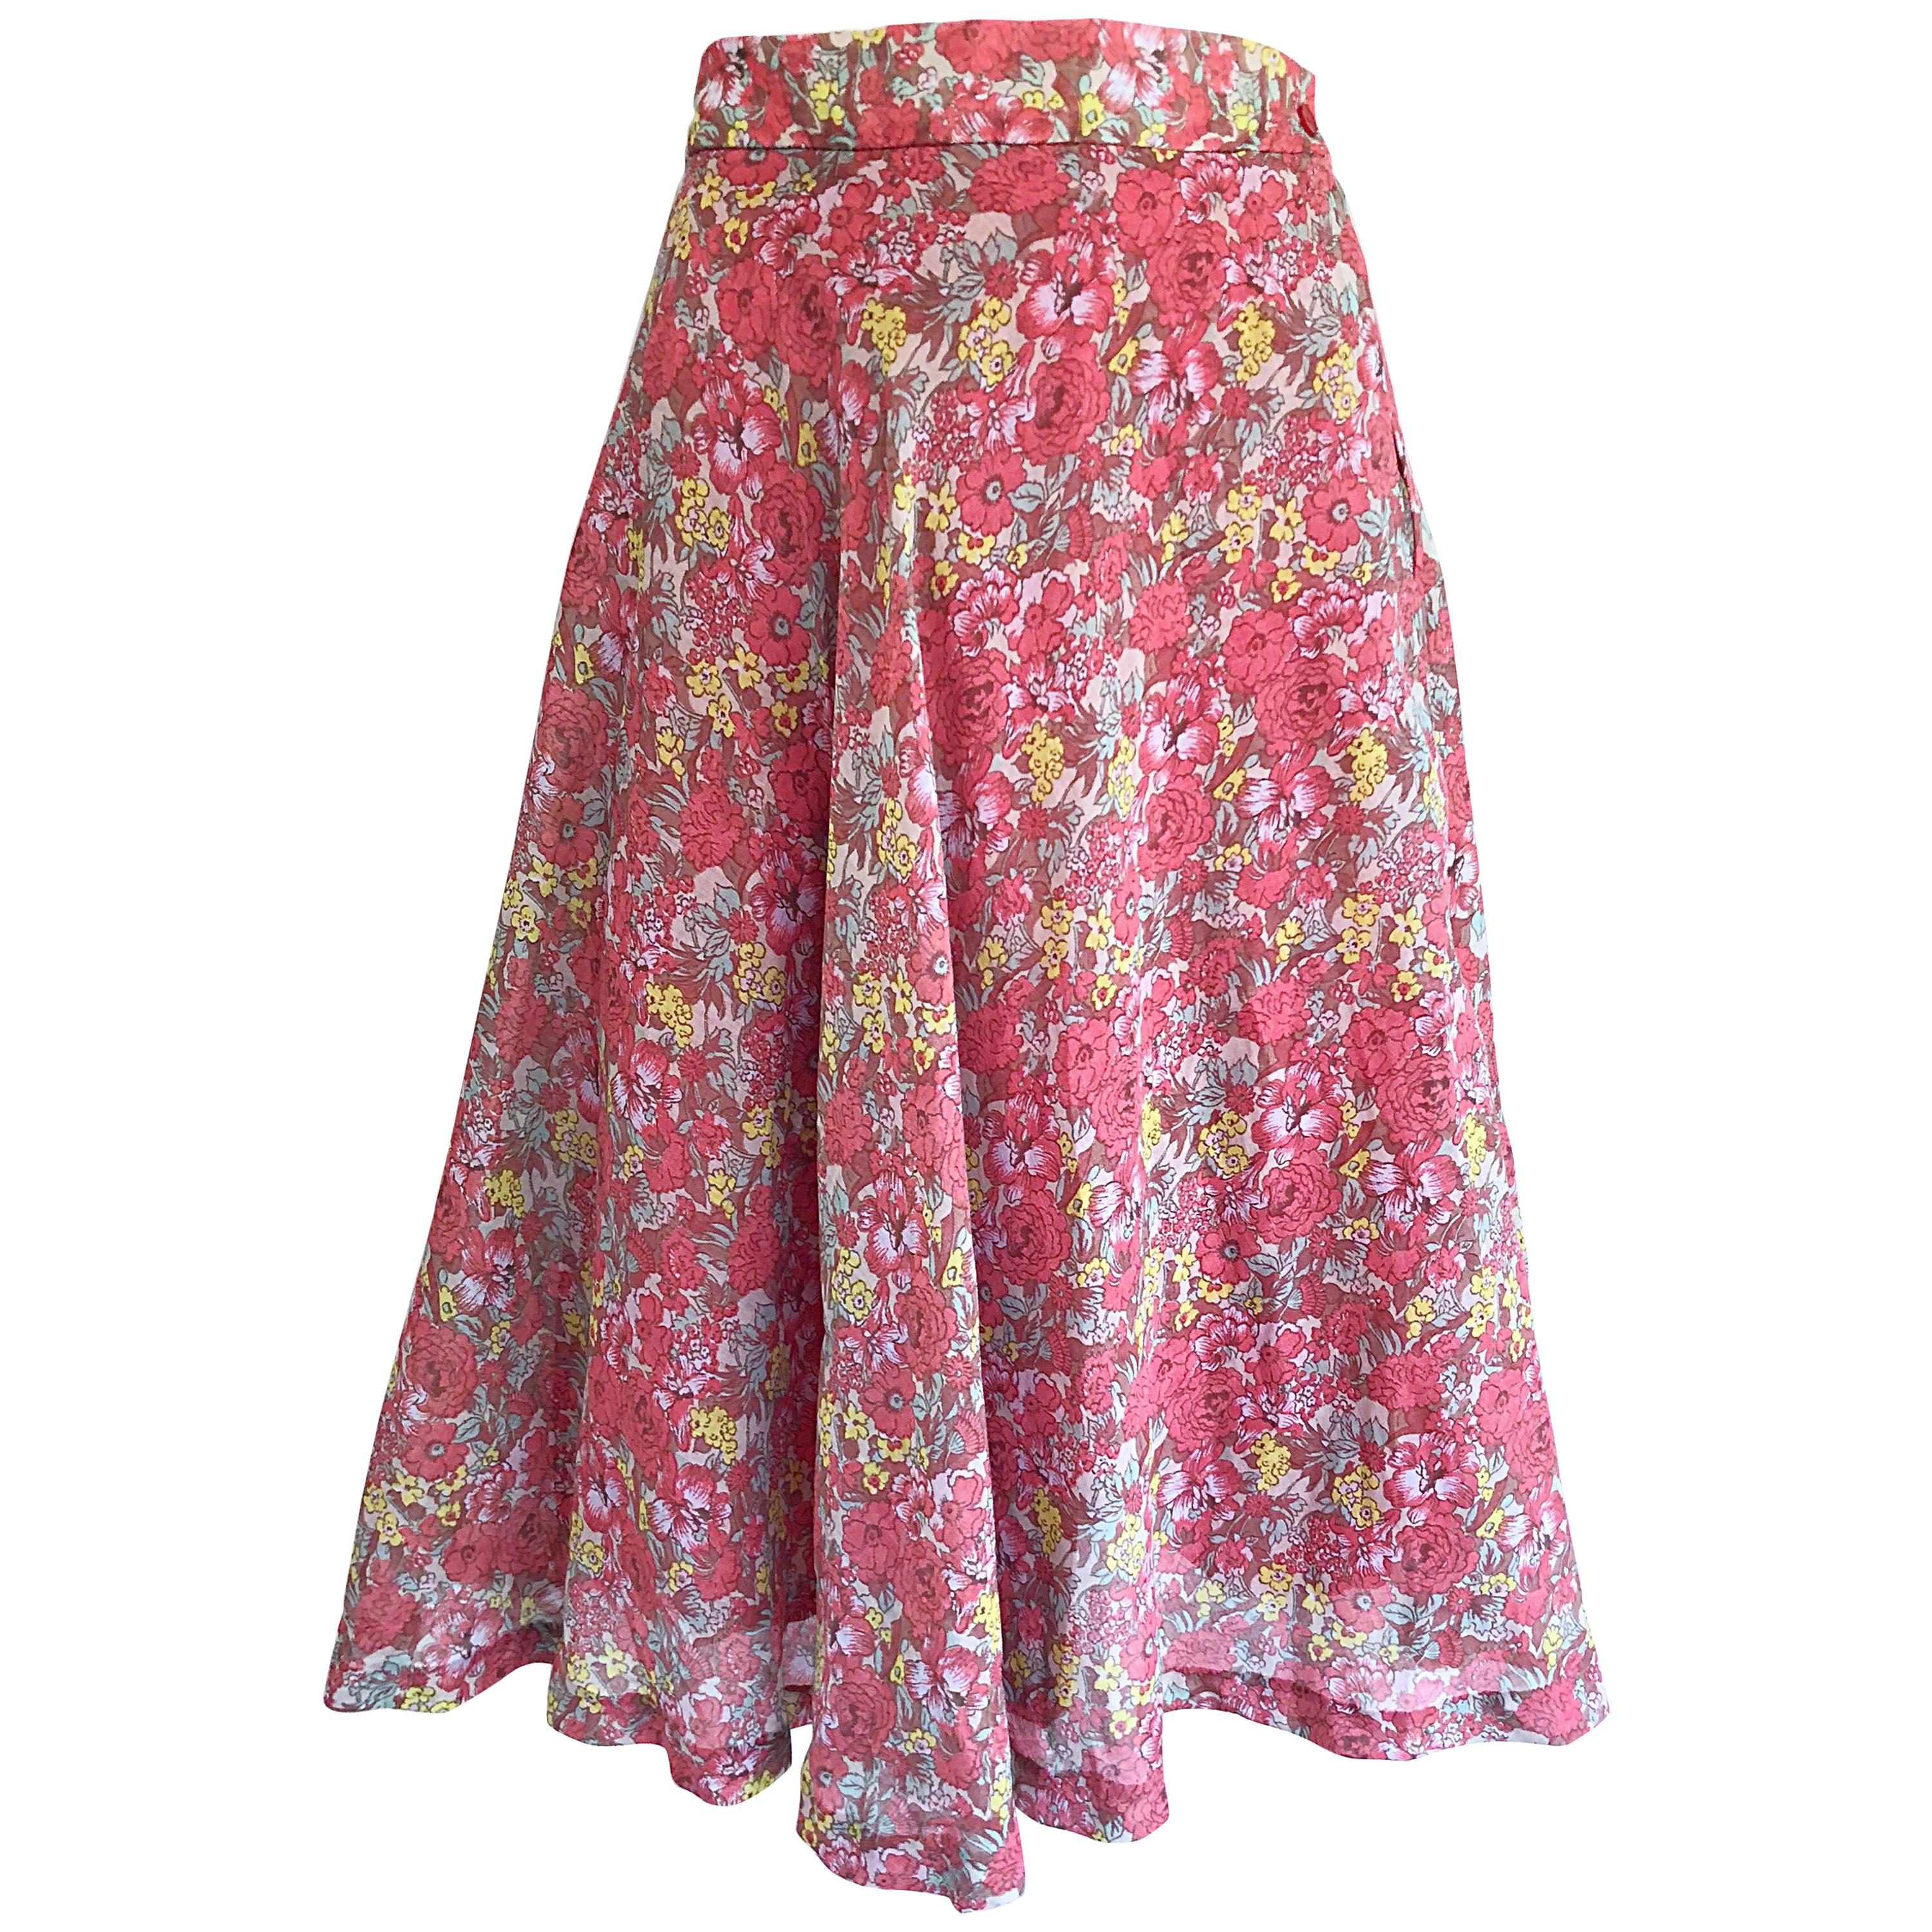 Flirty 1950s French Made Raspberry Pink Flower Print Cotton Voile Circle Skirt